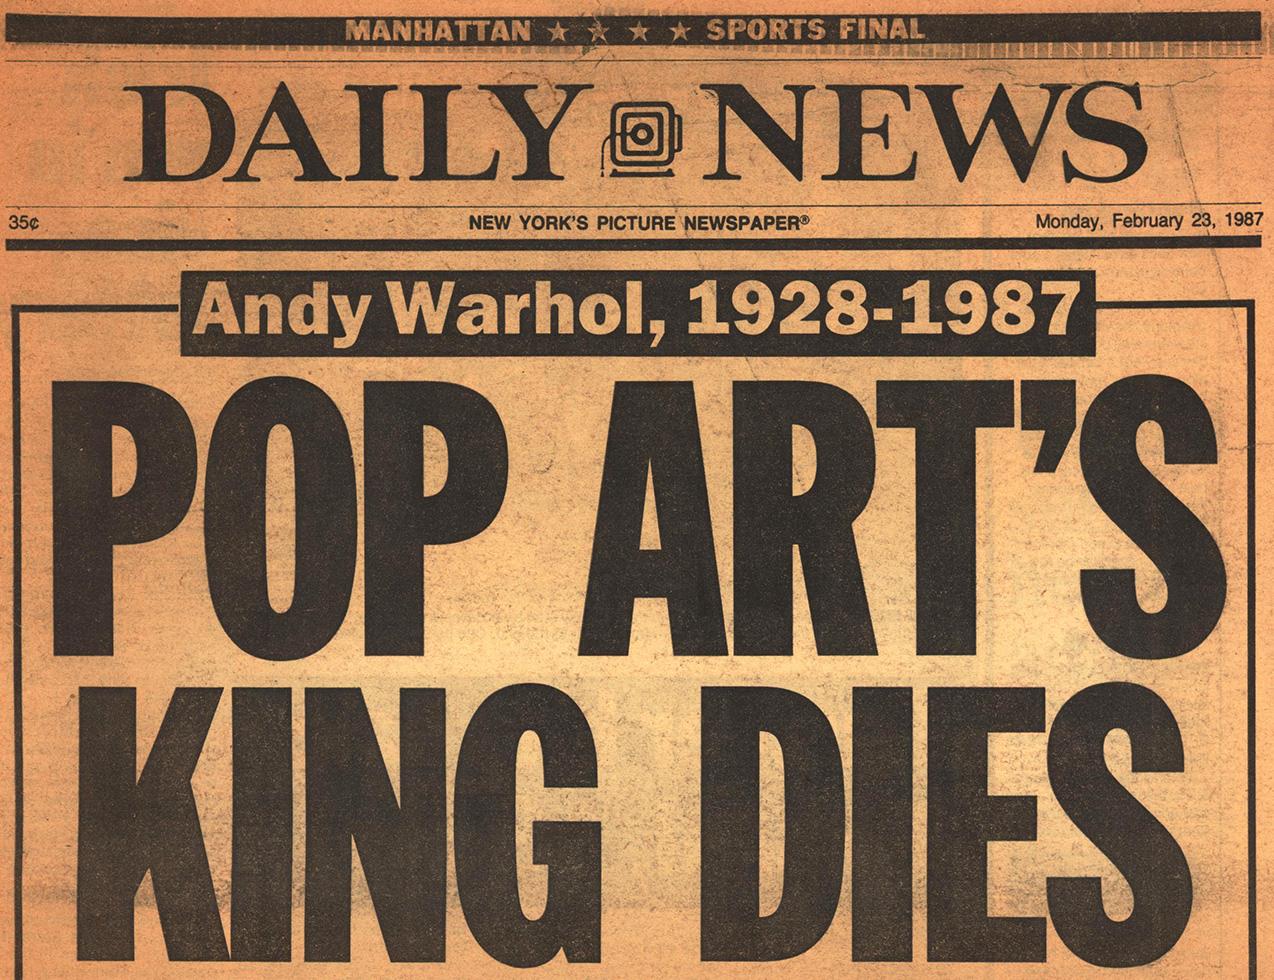 Andy Warhol Dies! Set of four 1987 NY Newspapers announcing Andy Warhol's death - Pop Art Art by (after) Andy Warhol